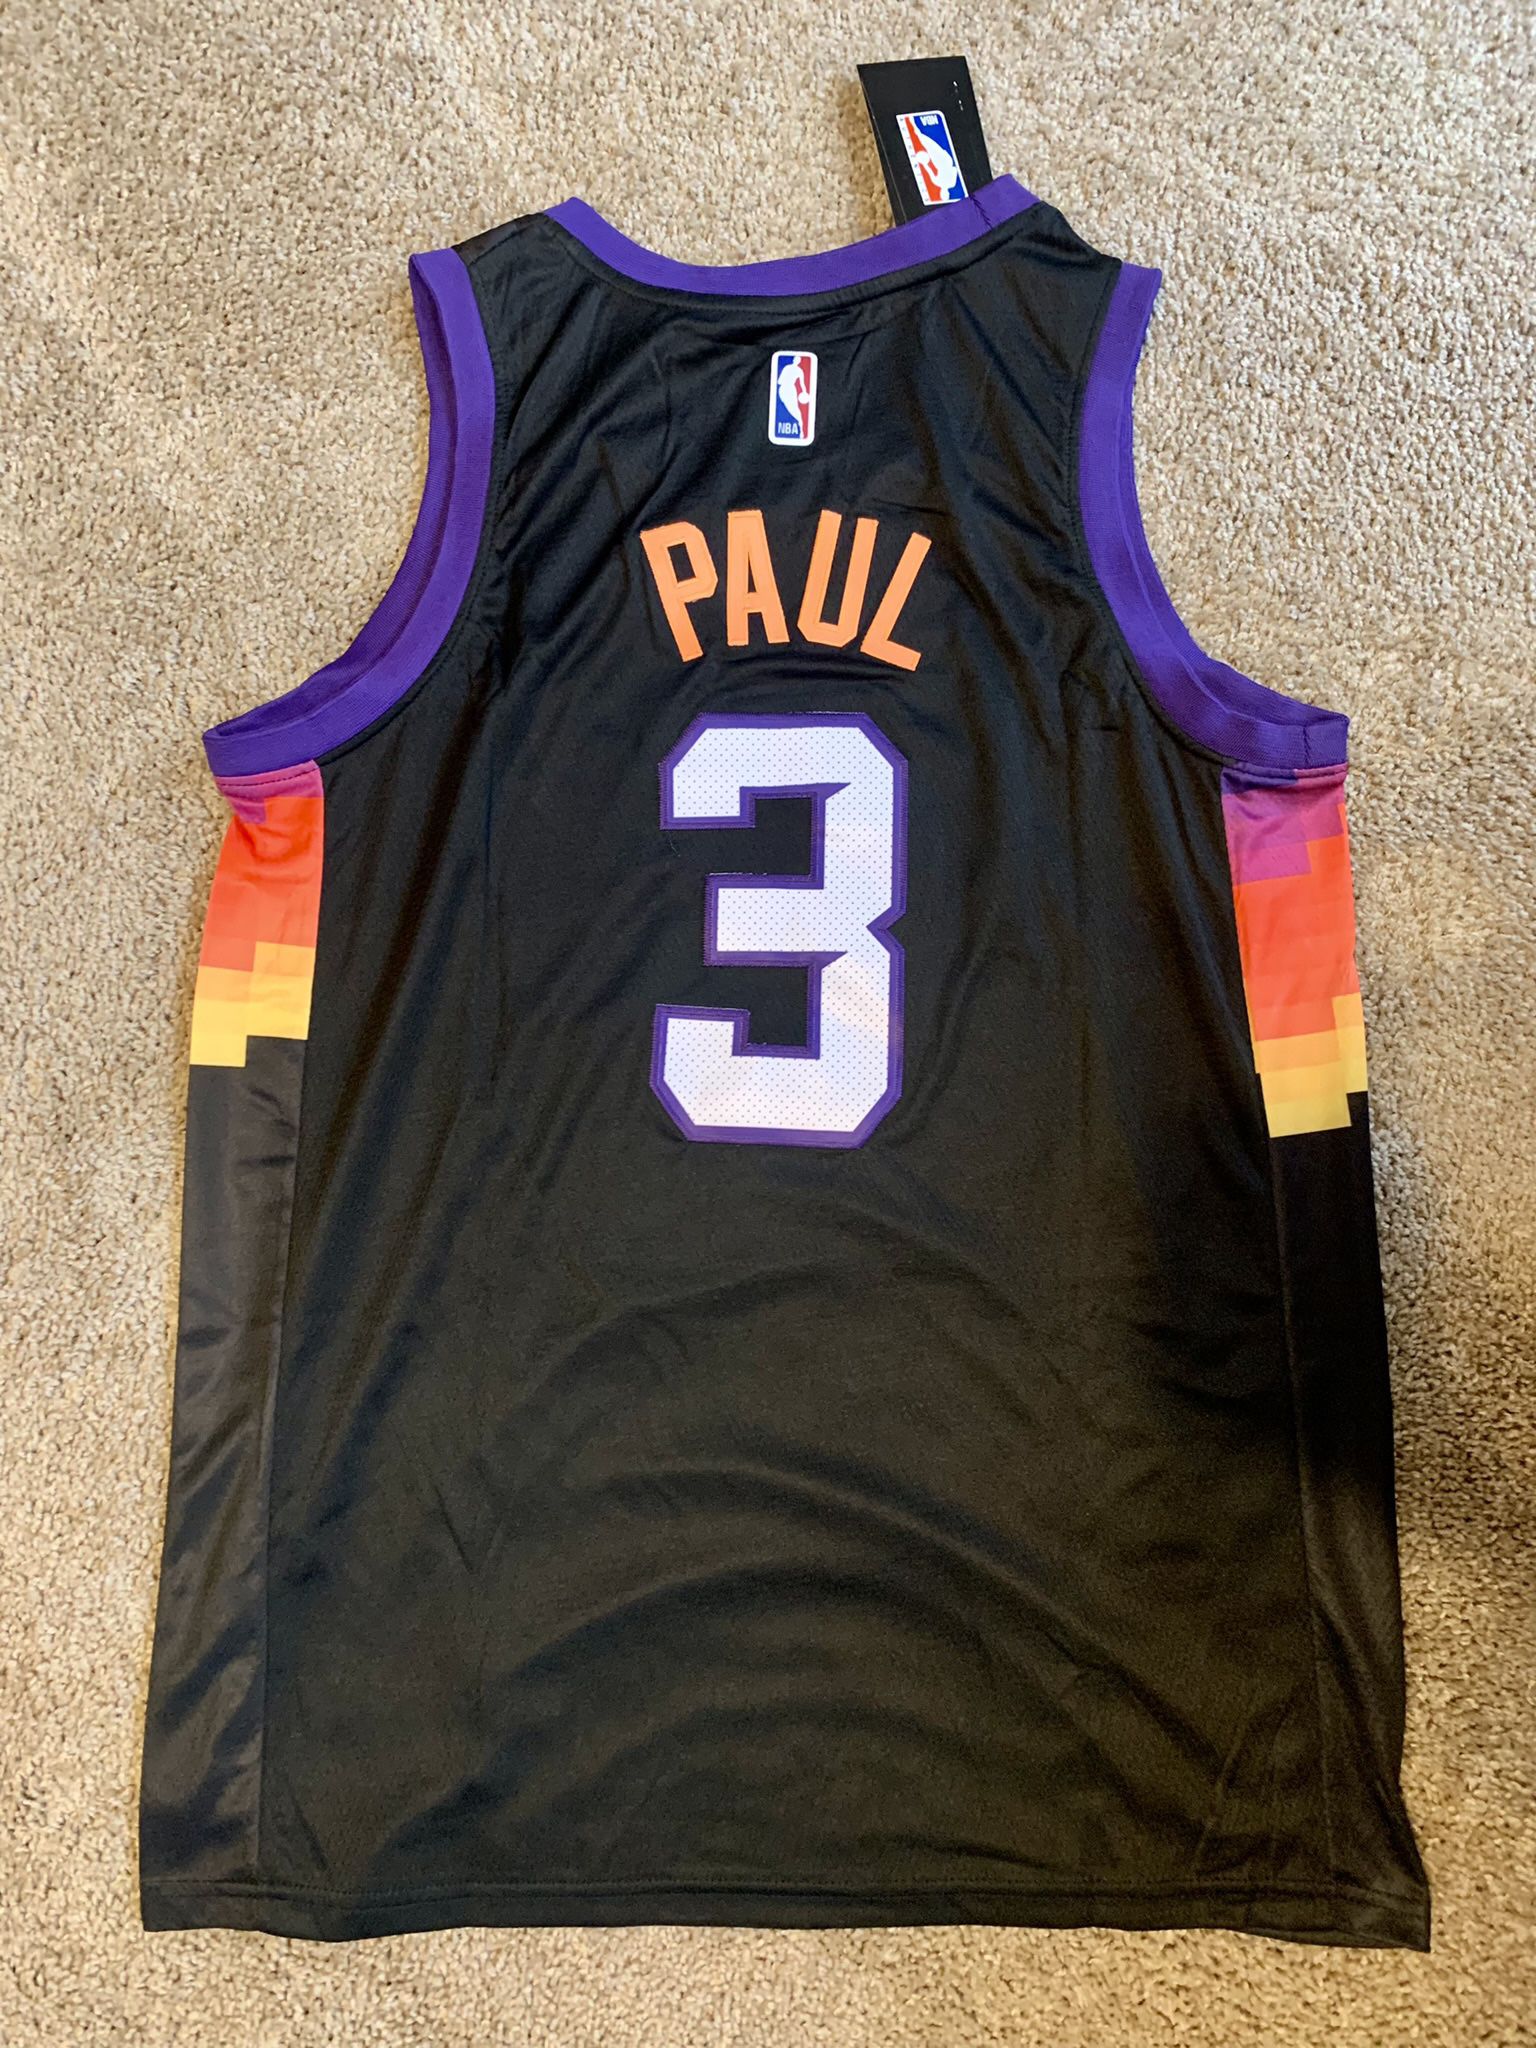 Chris Paul Phoenix Suns 2020-21 City Edition The Valley Black Jersey large  for Sale in Greenville, SC - OfferUp